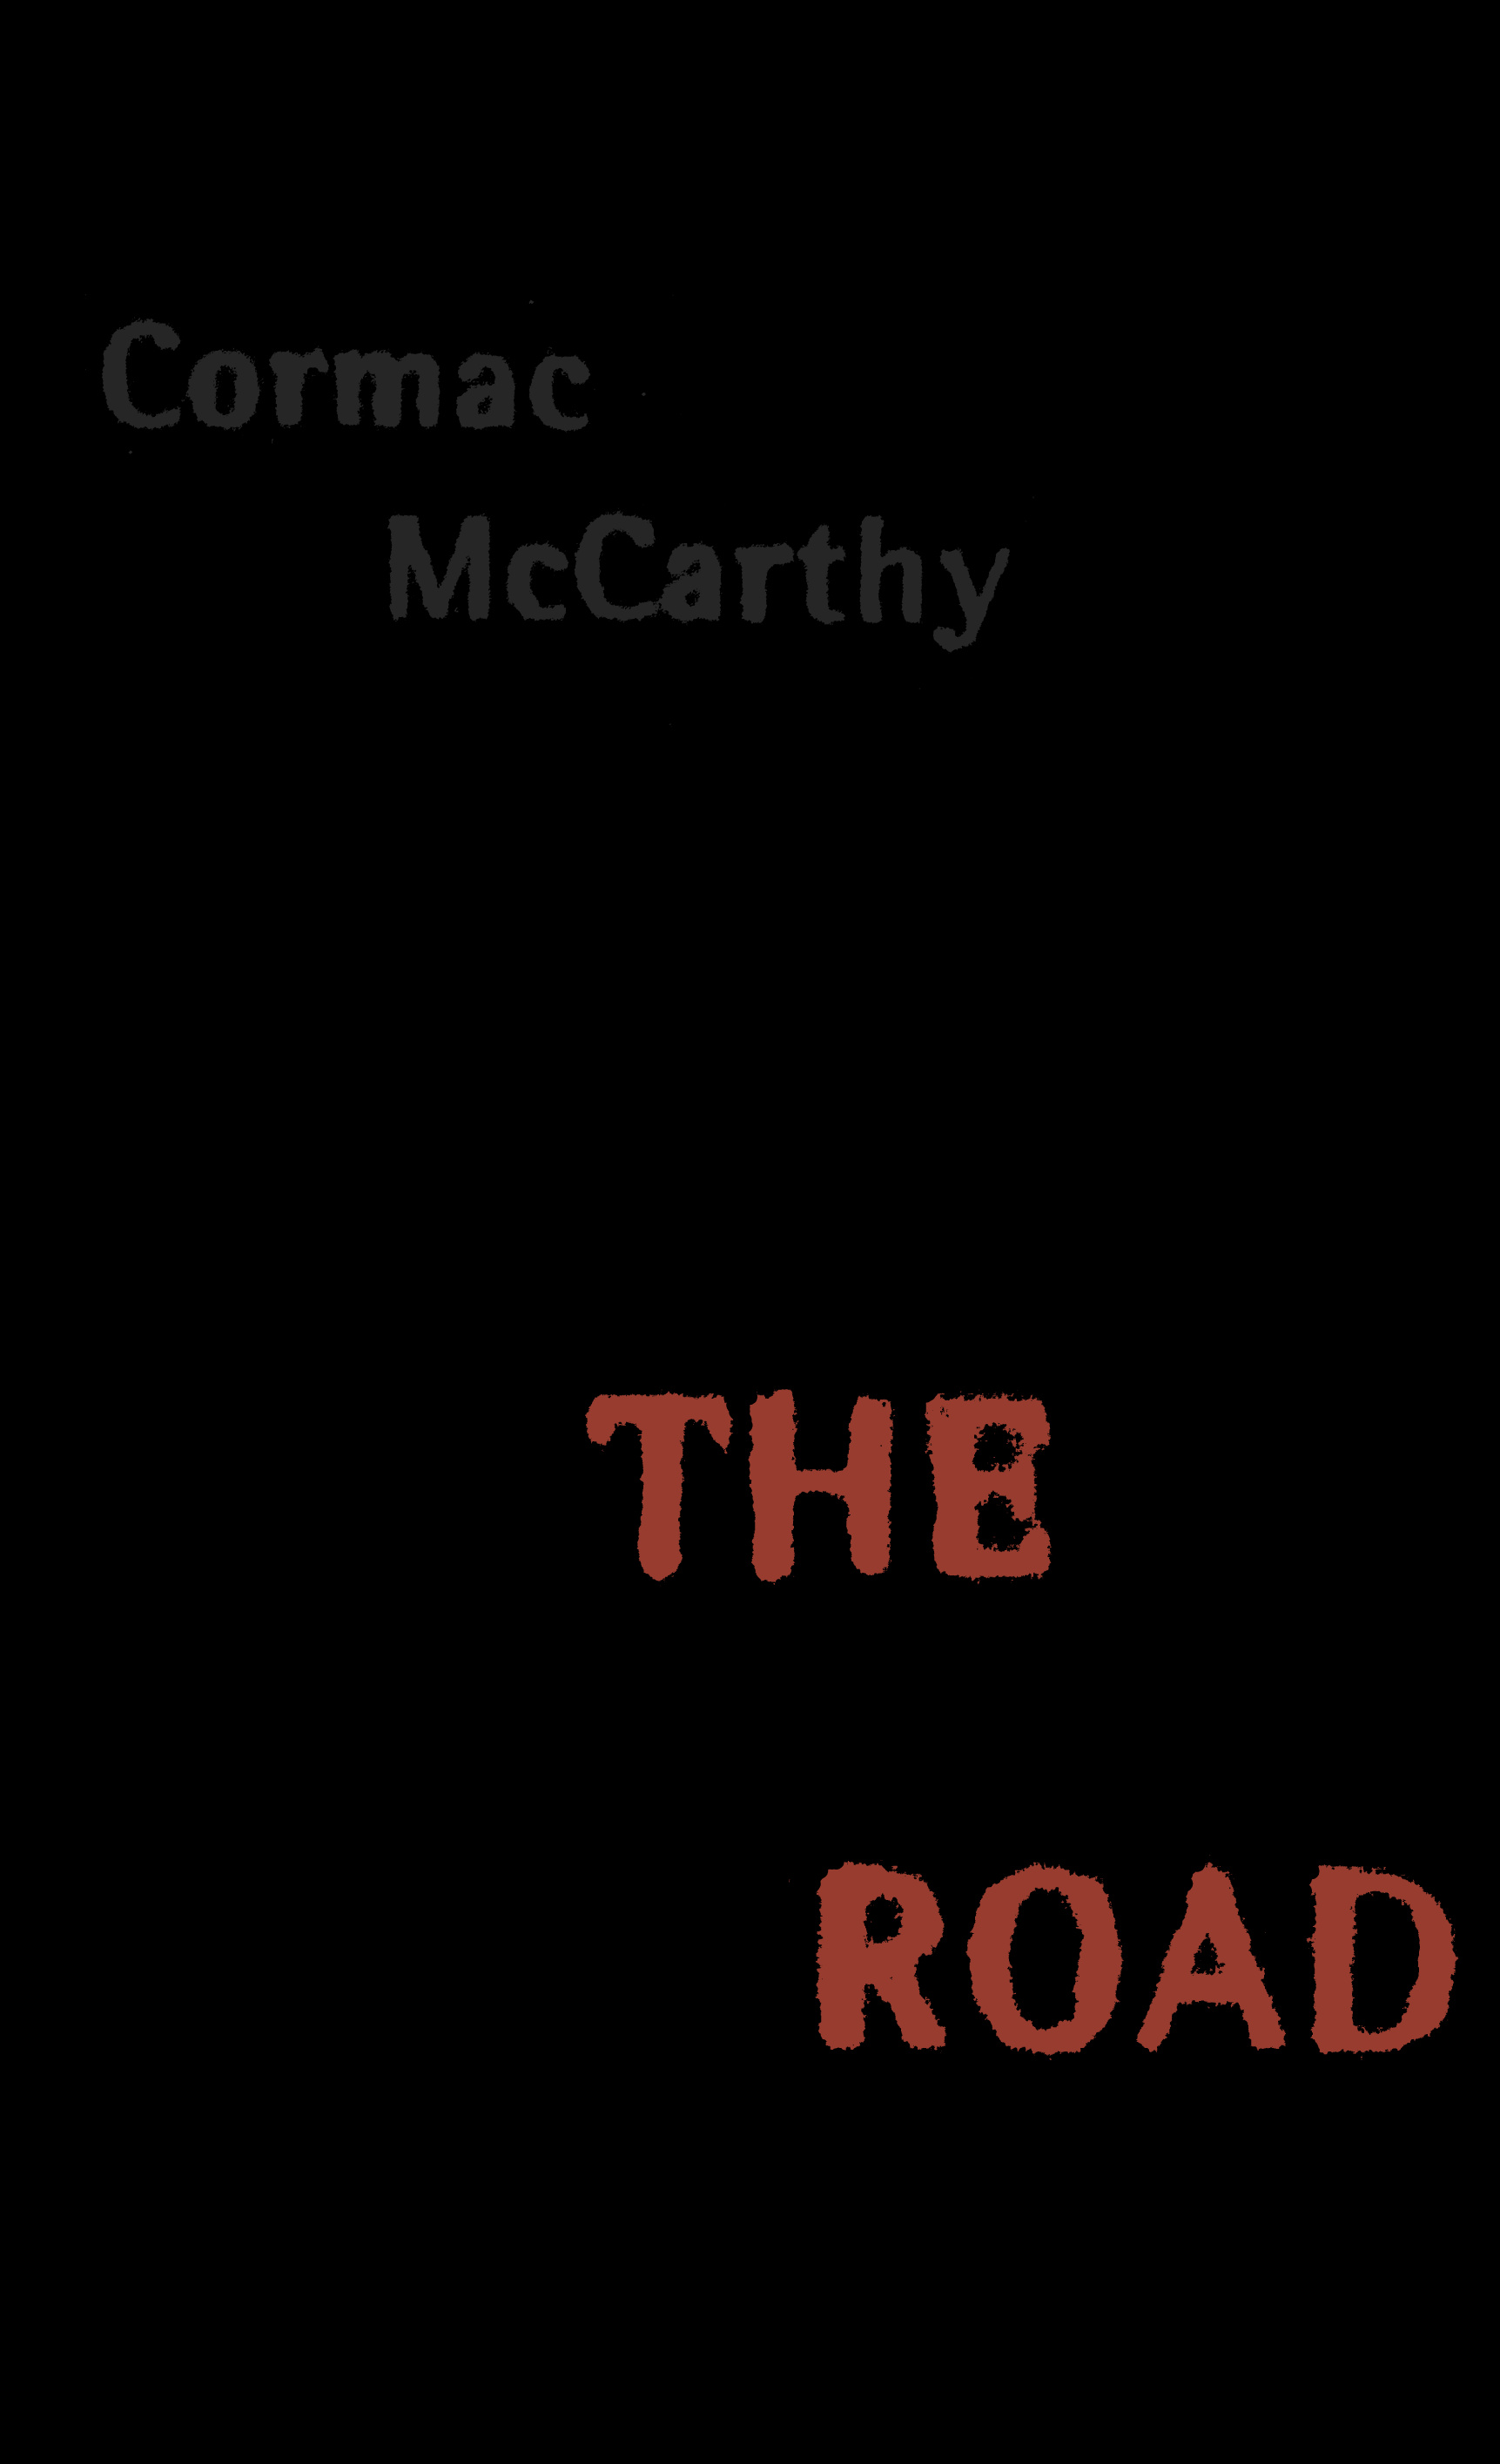 Cormac McCarthy: The Road (Hardcover, 2006, Alfred A. Knopf)